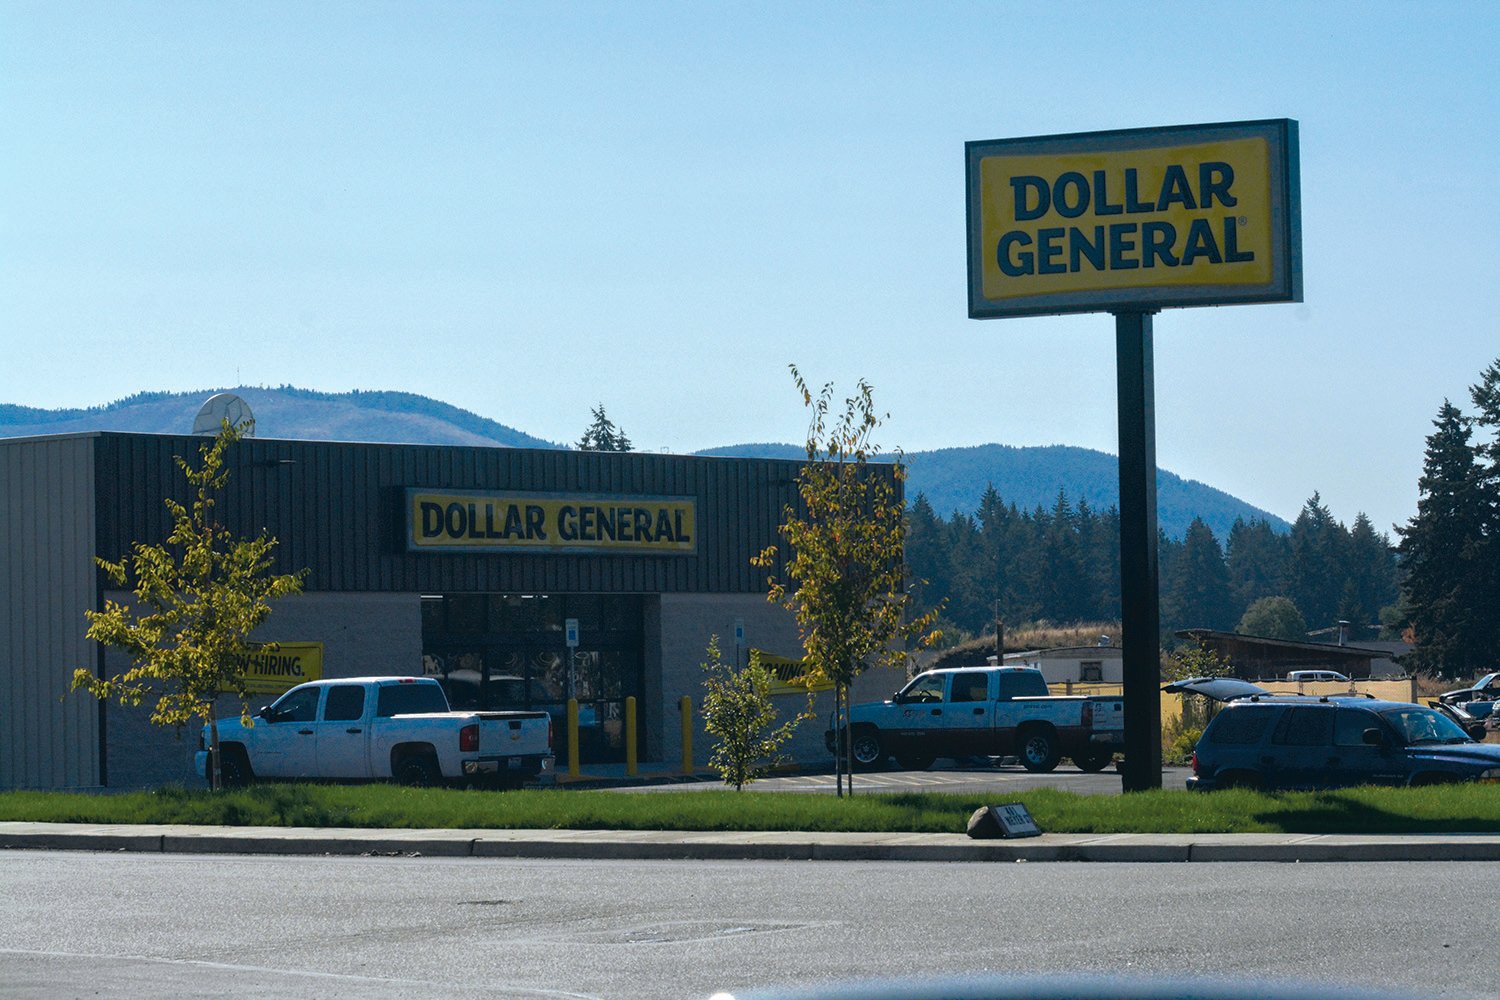 Dollar General in Rainier is located at 401 Myers Street.